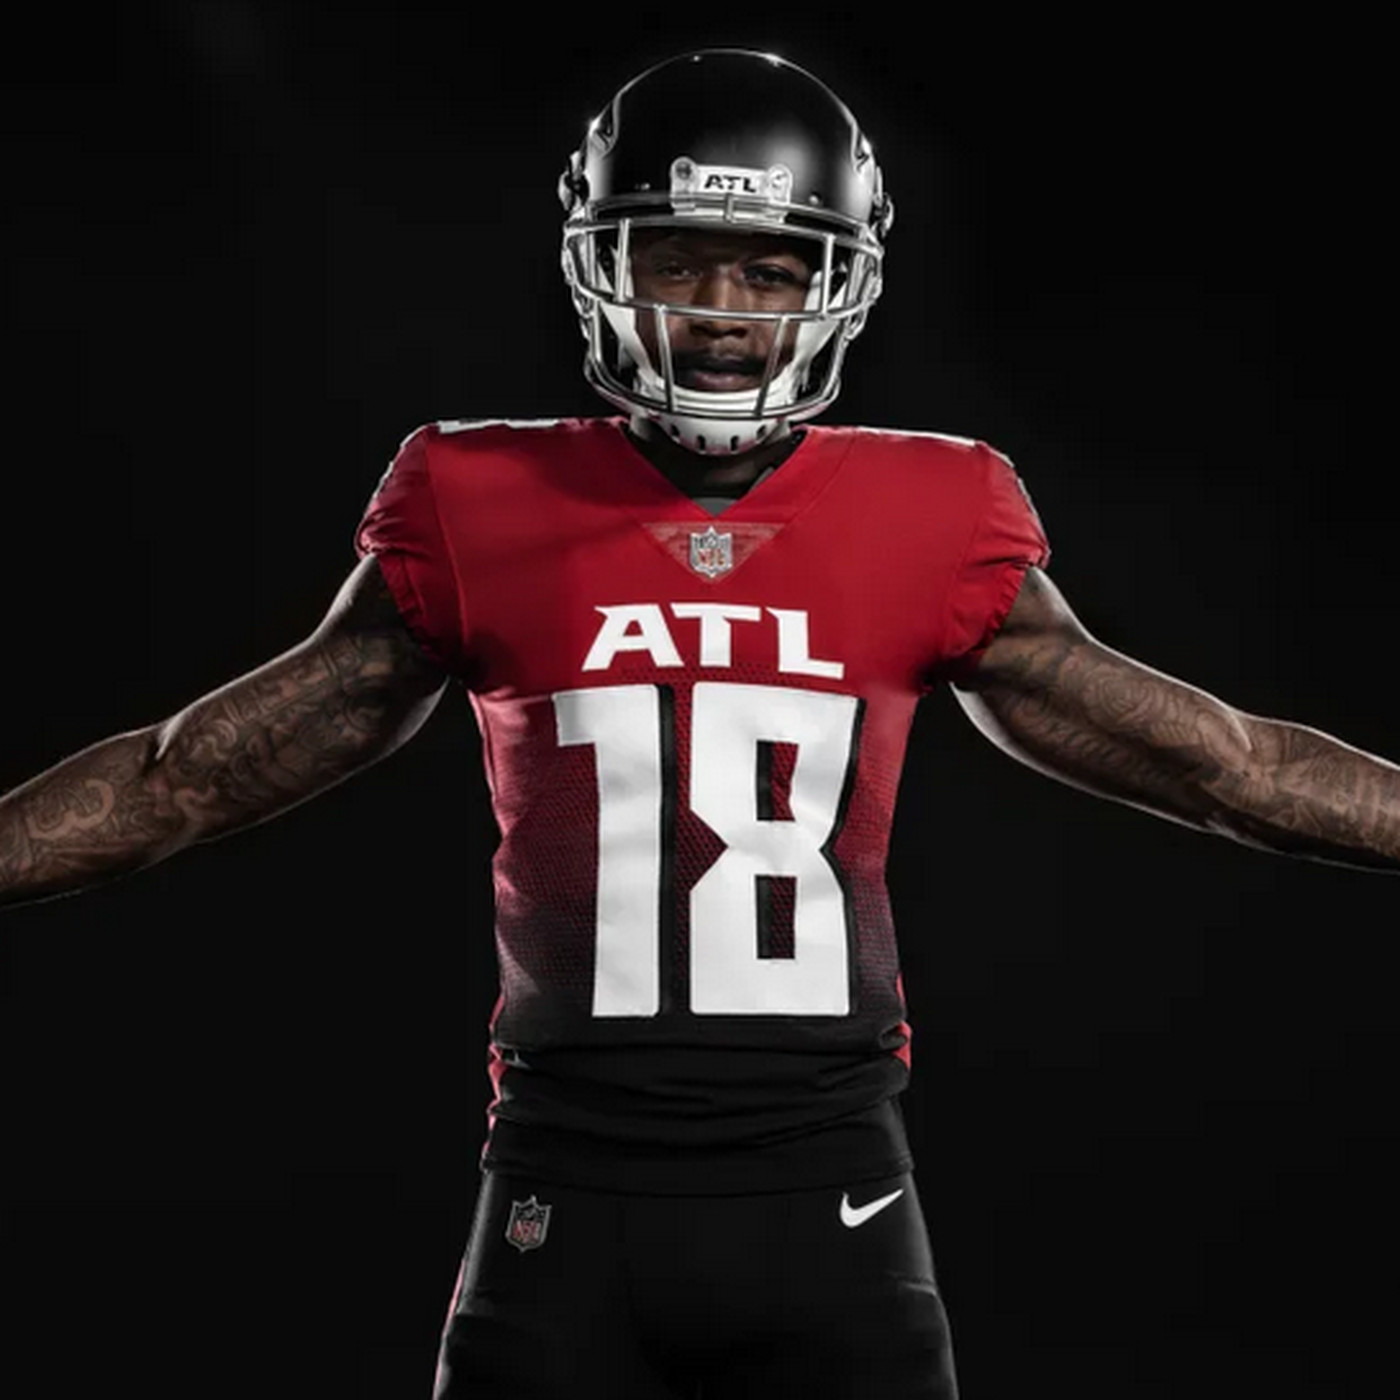 falcons red jersey